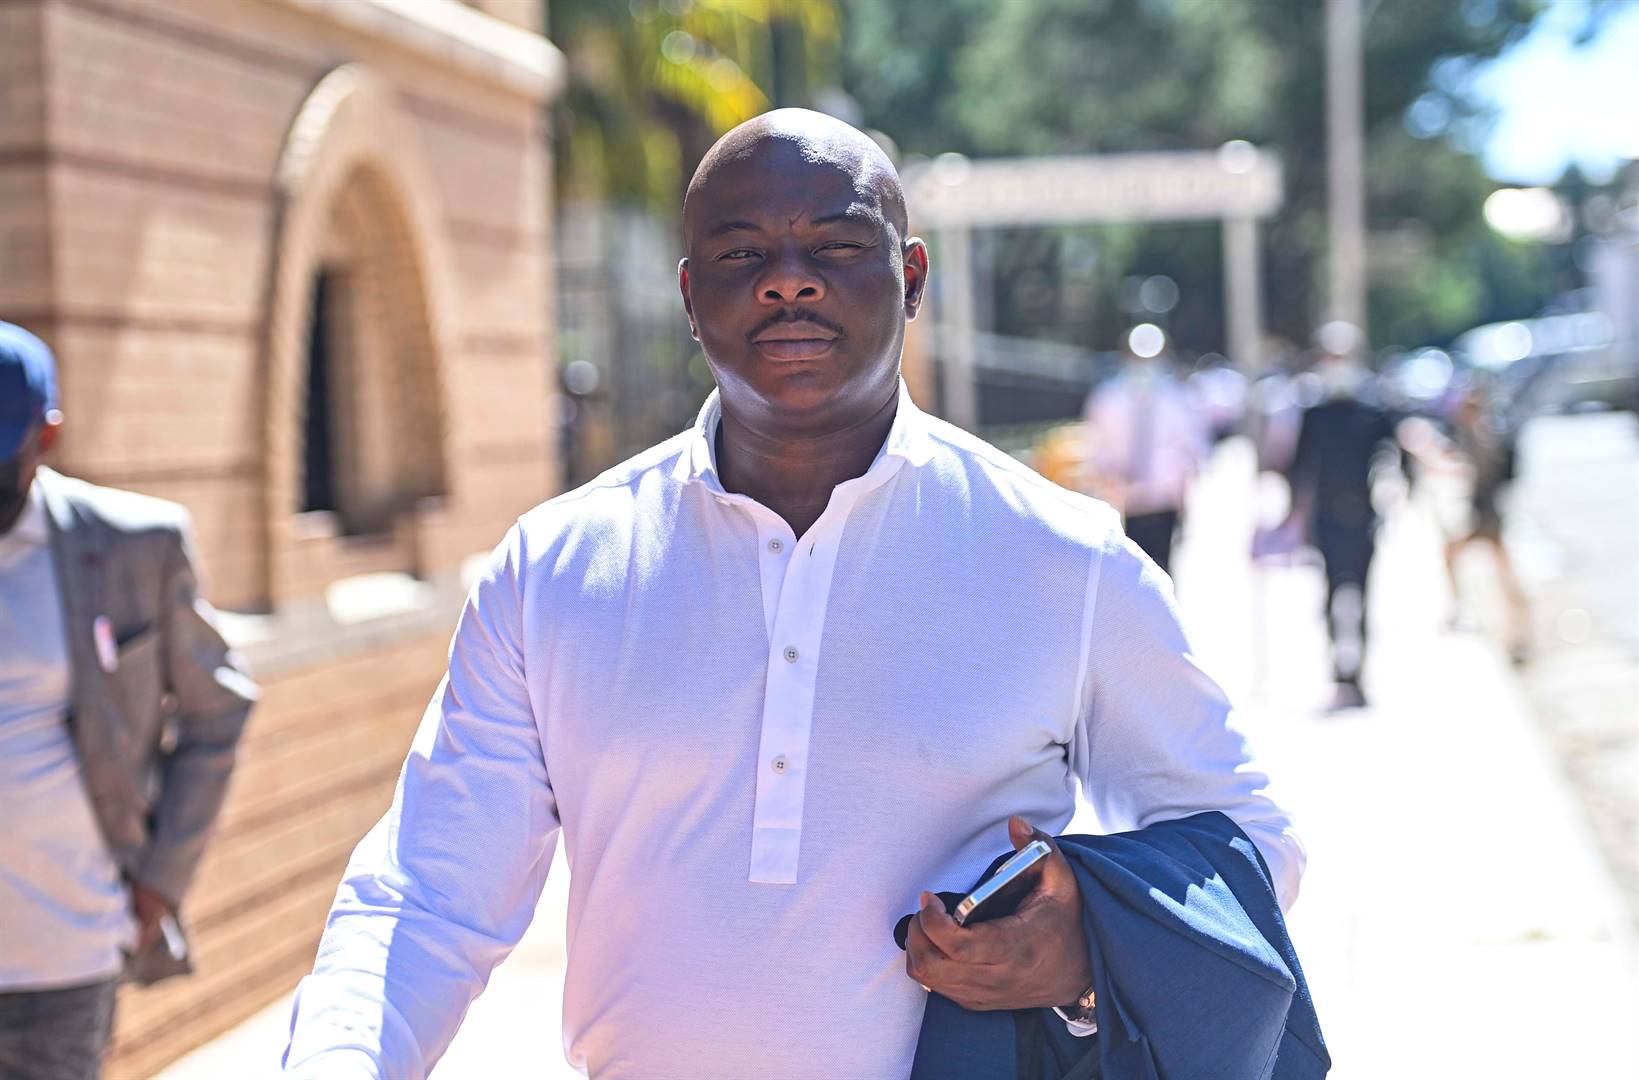 Blackhead Consulting CEO Edwin Sodi denies that he plans to get married. Photo: Mlungisi Louw/Volksblad/Gallo Images